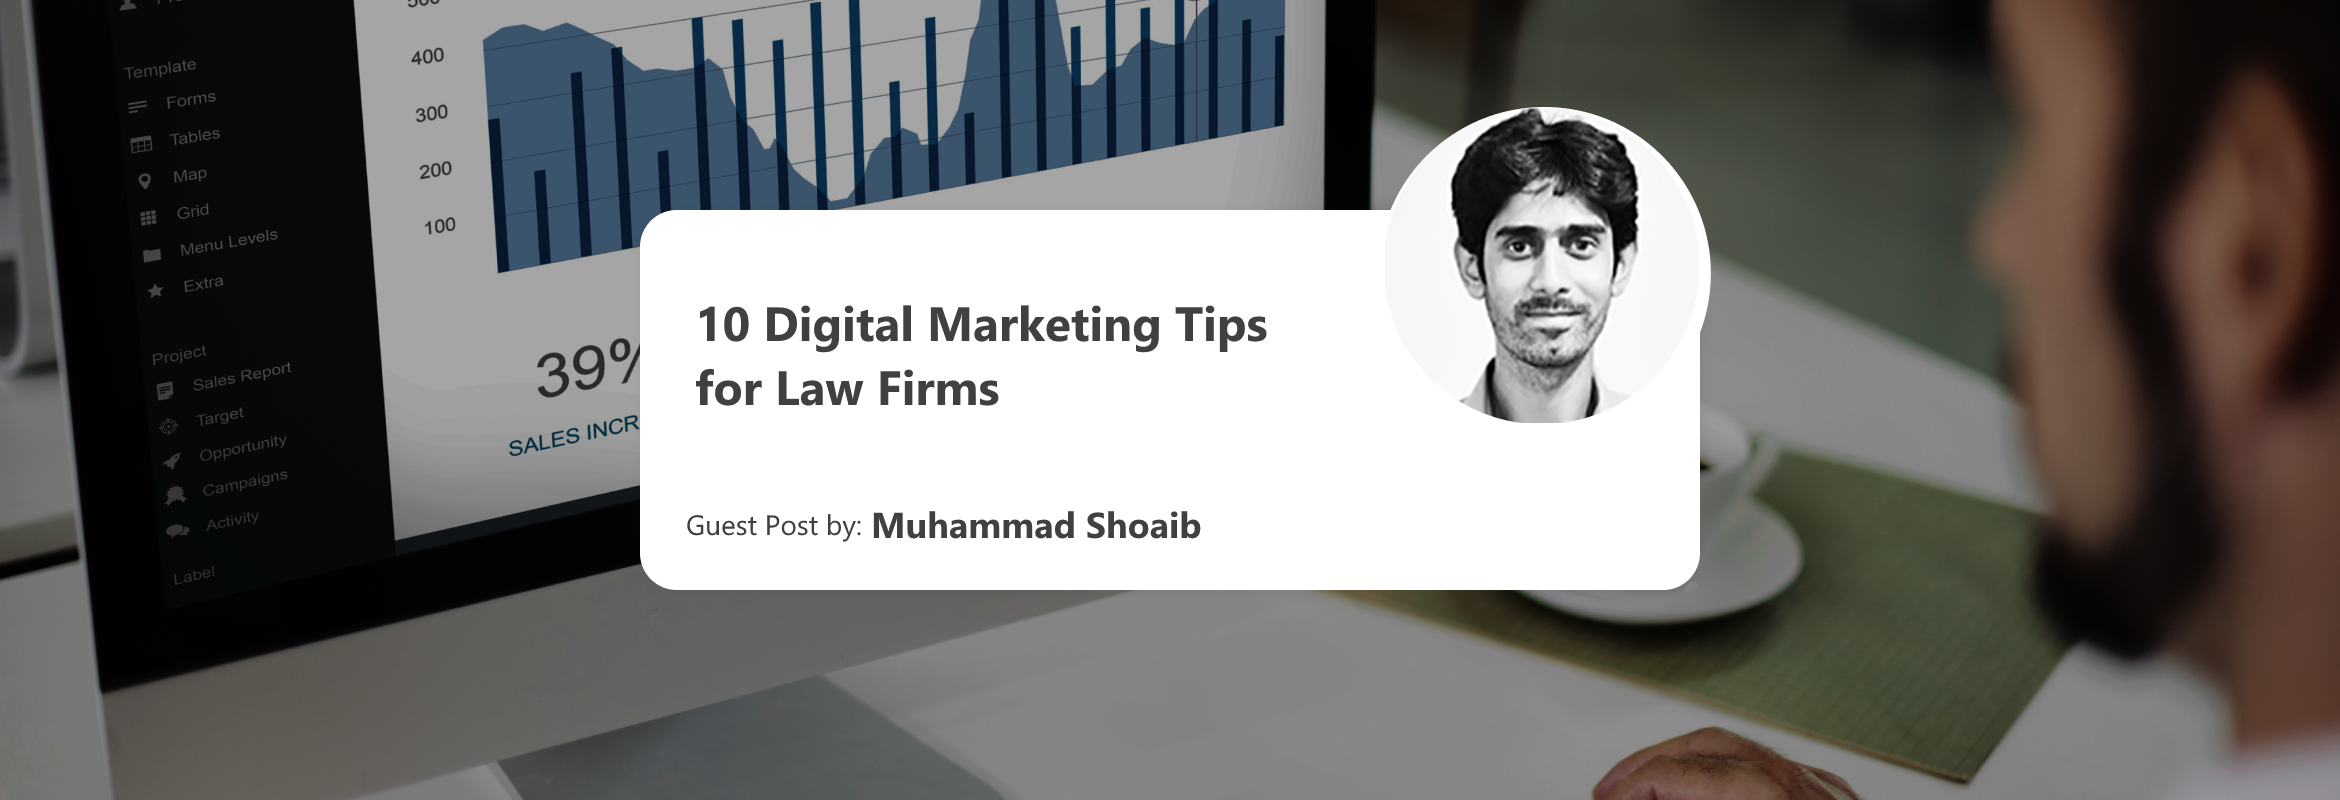 10 digital marketing tips for law firms